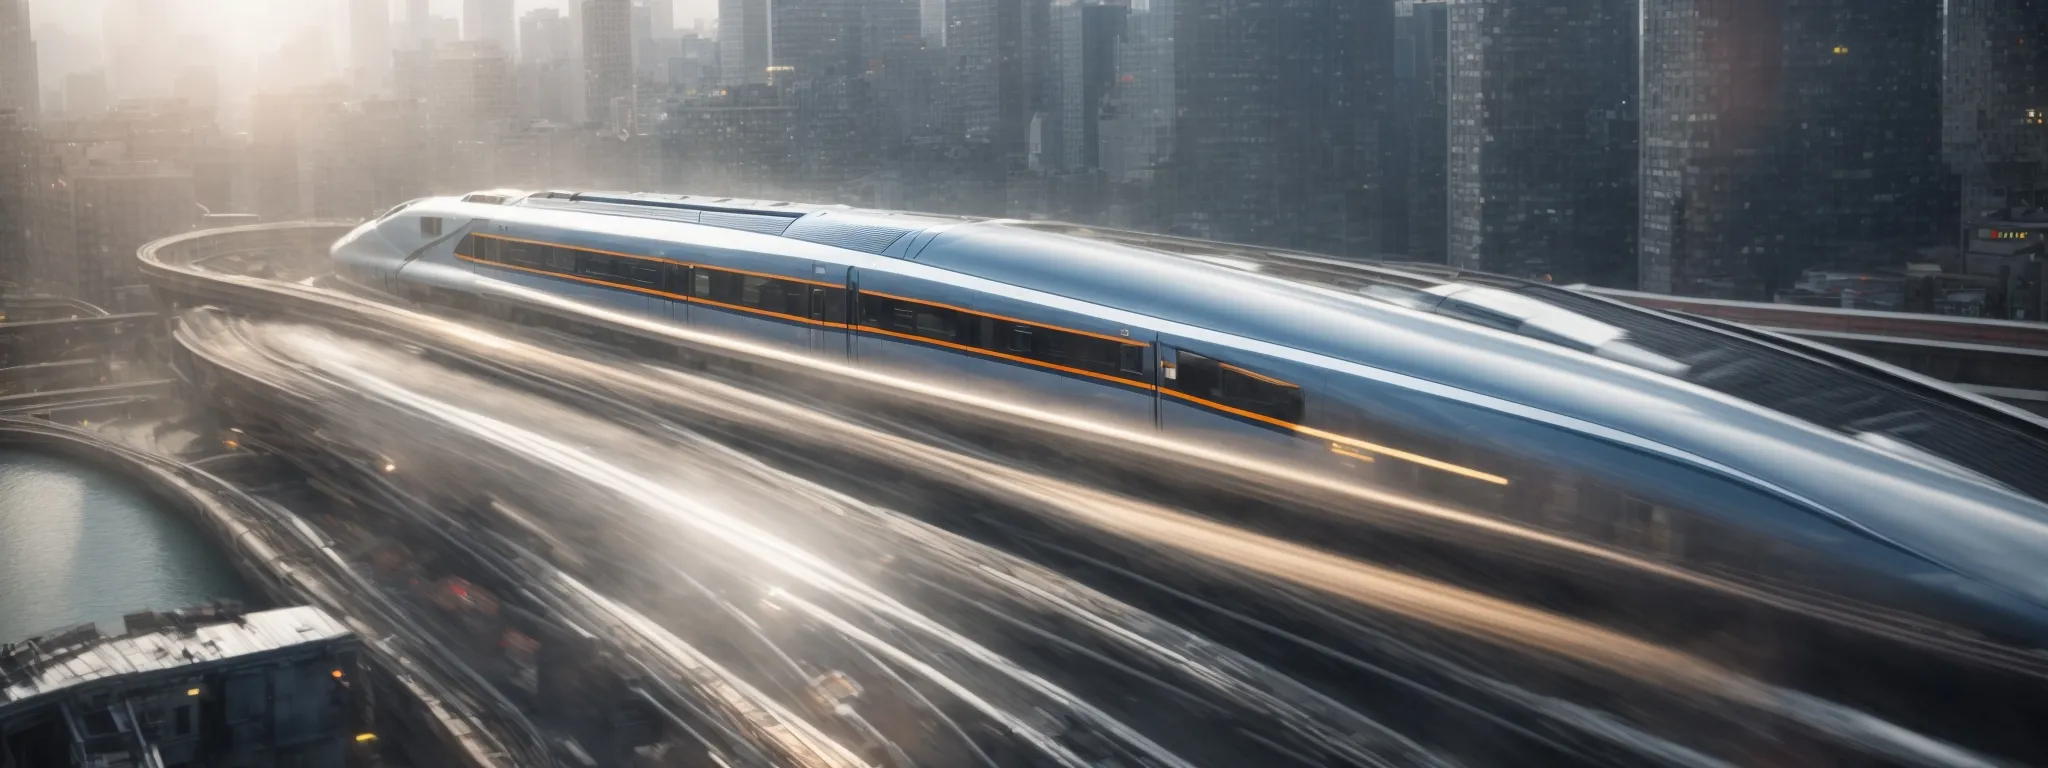 a high-speed train zooming through a futuristic city, symbolizing speed, efficiency, and modernity.